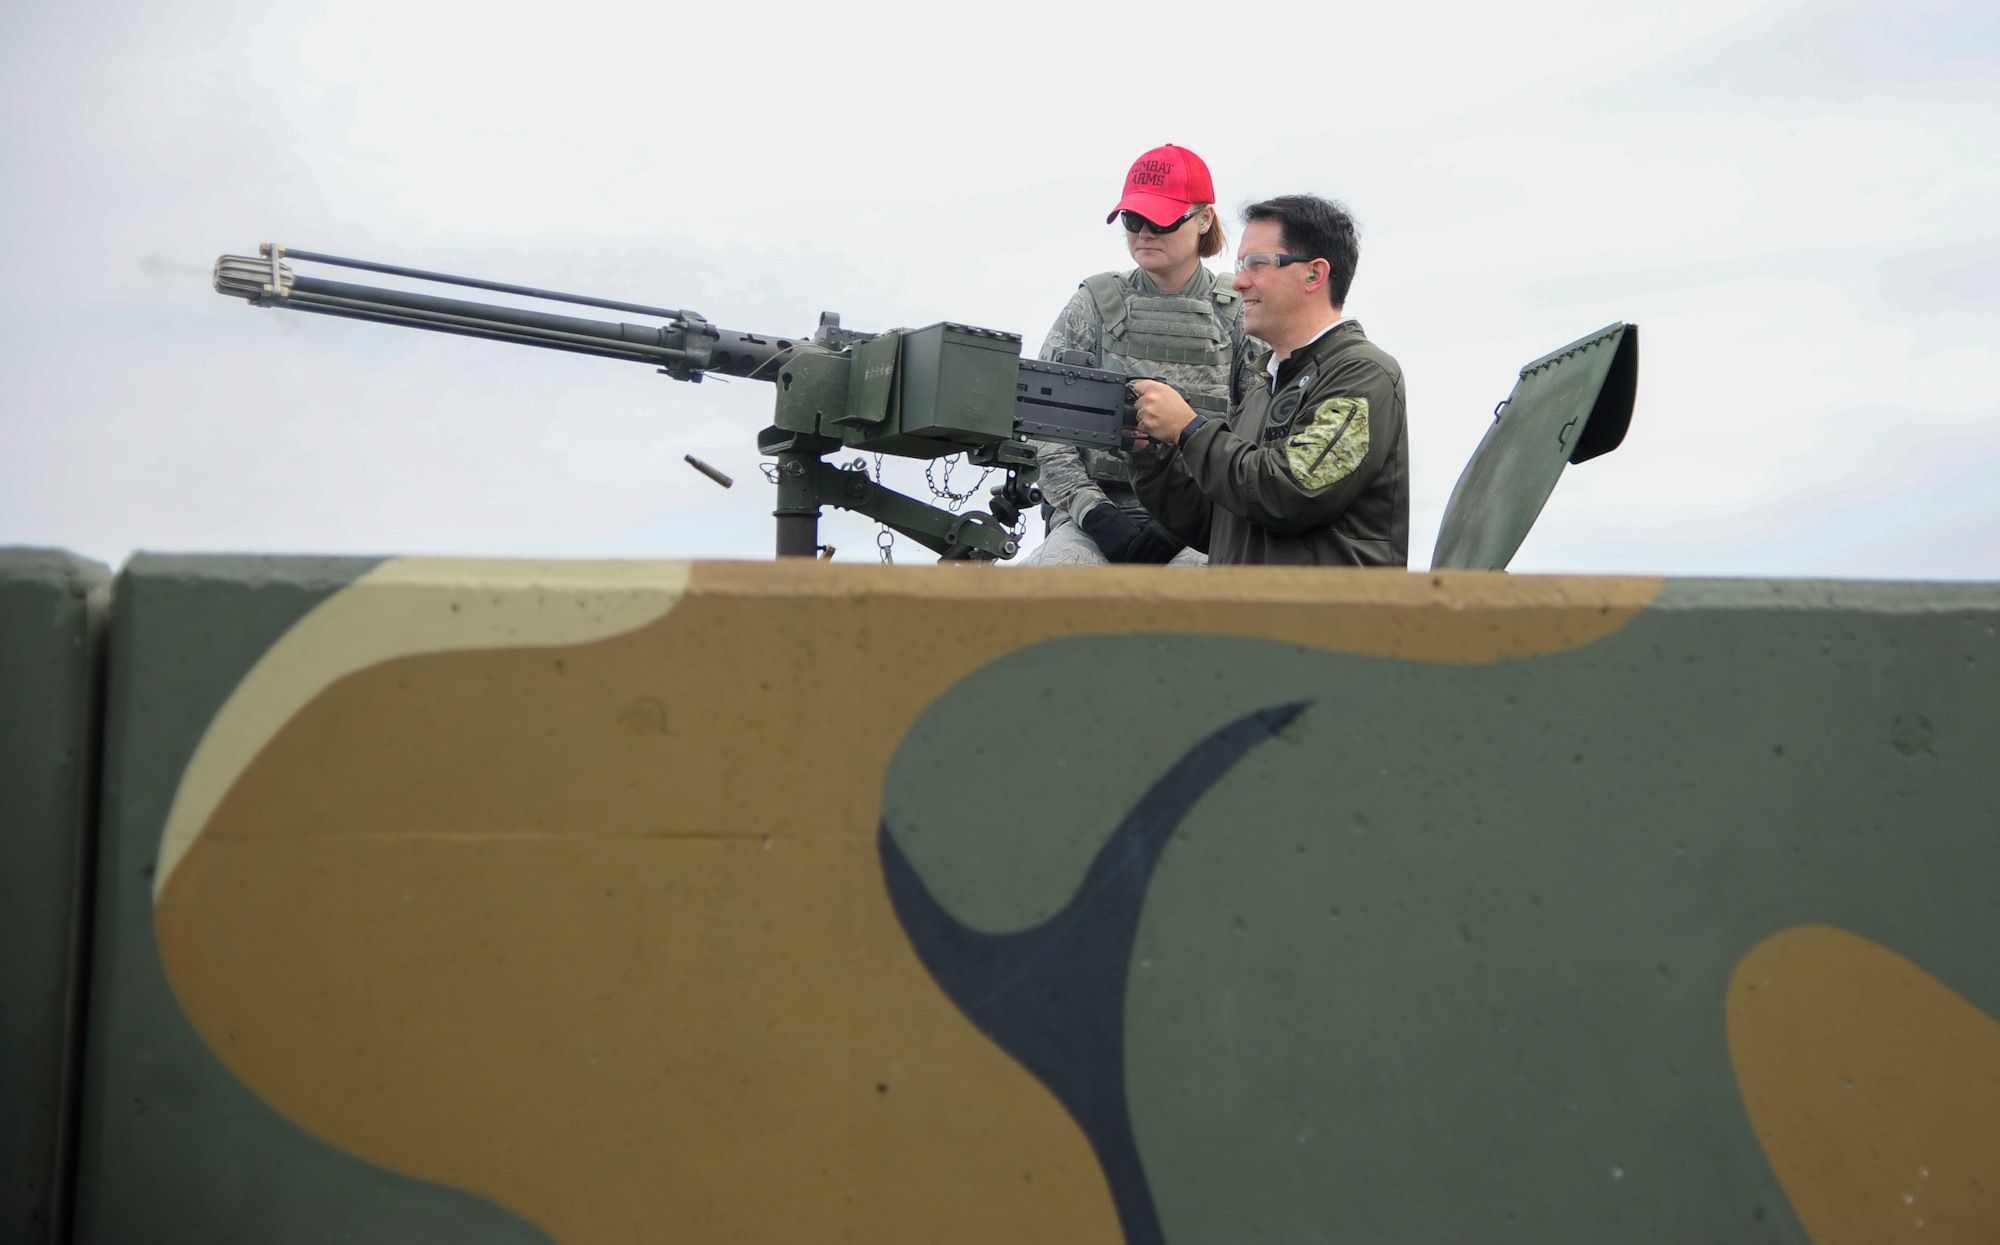 The Honorable Scott Walker, Governor of Wisconsin, fires blanks rounds from a .50 caliber machine gun mounted on a HMMWV during an 8th Security Forces Squadron demonstration at Kunsan Air Base, Republic of Korea, Sept. 16, 2017. Walker visited Wisconsin Air National Guard 115th Fighter Wing Airmen deployed as part of a Theater Security Package and gained a greater understanding of the Wolf Pack’s mission. (U.S. Air Force photo by Senior Airman Colby L. Hardin)